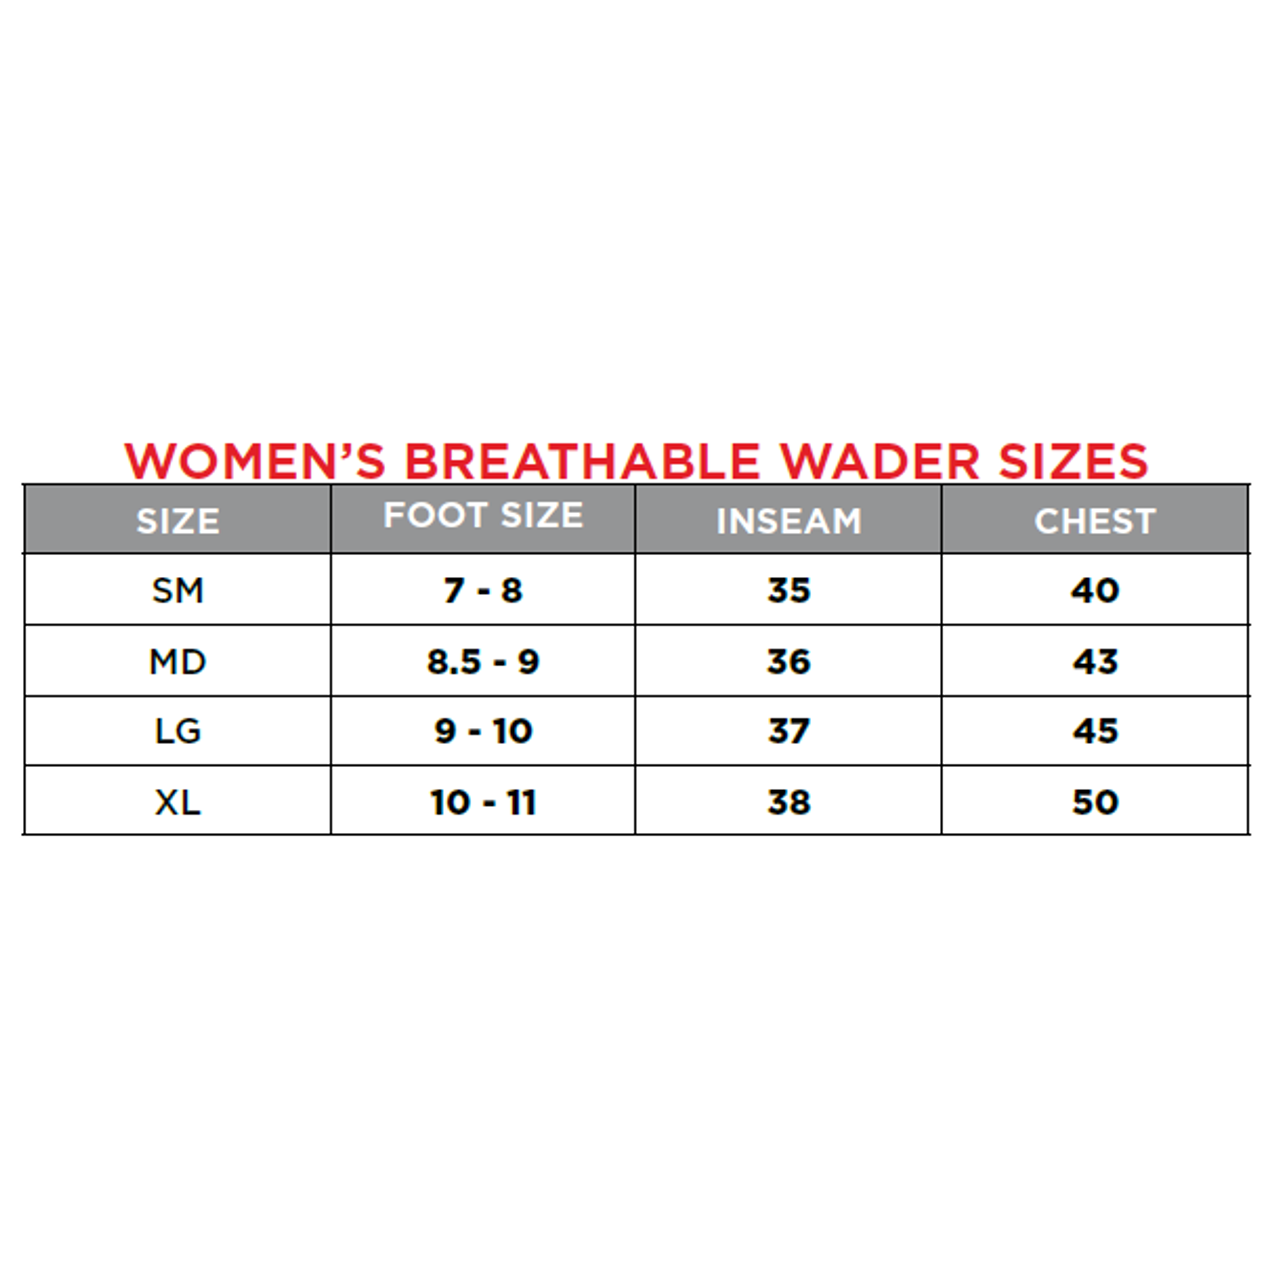 https://cdn11.bigcommerce.com/s-p1h42/images/stencil/1280x1280/products/1748/8623/womens-breathable-wader-sizes__17604.1687823436.png?c=2